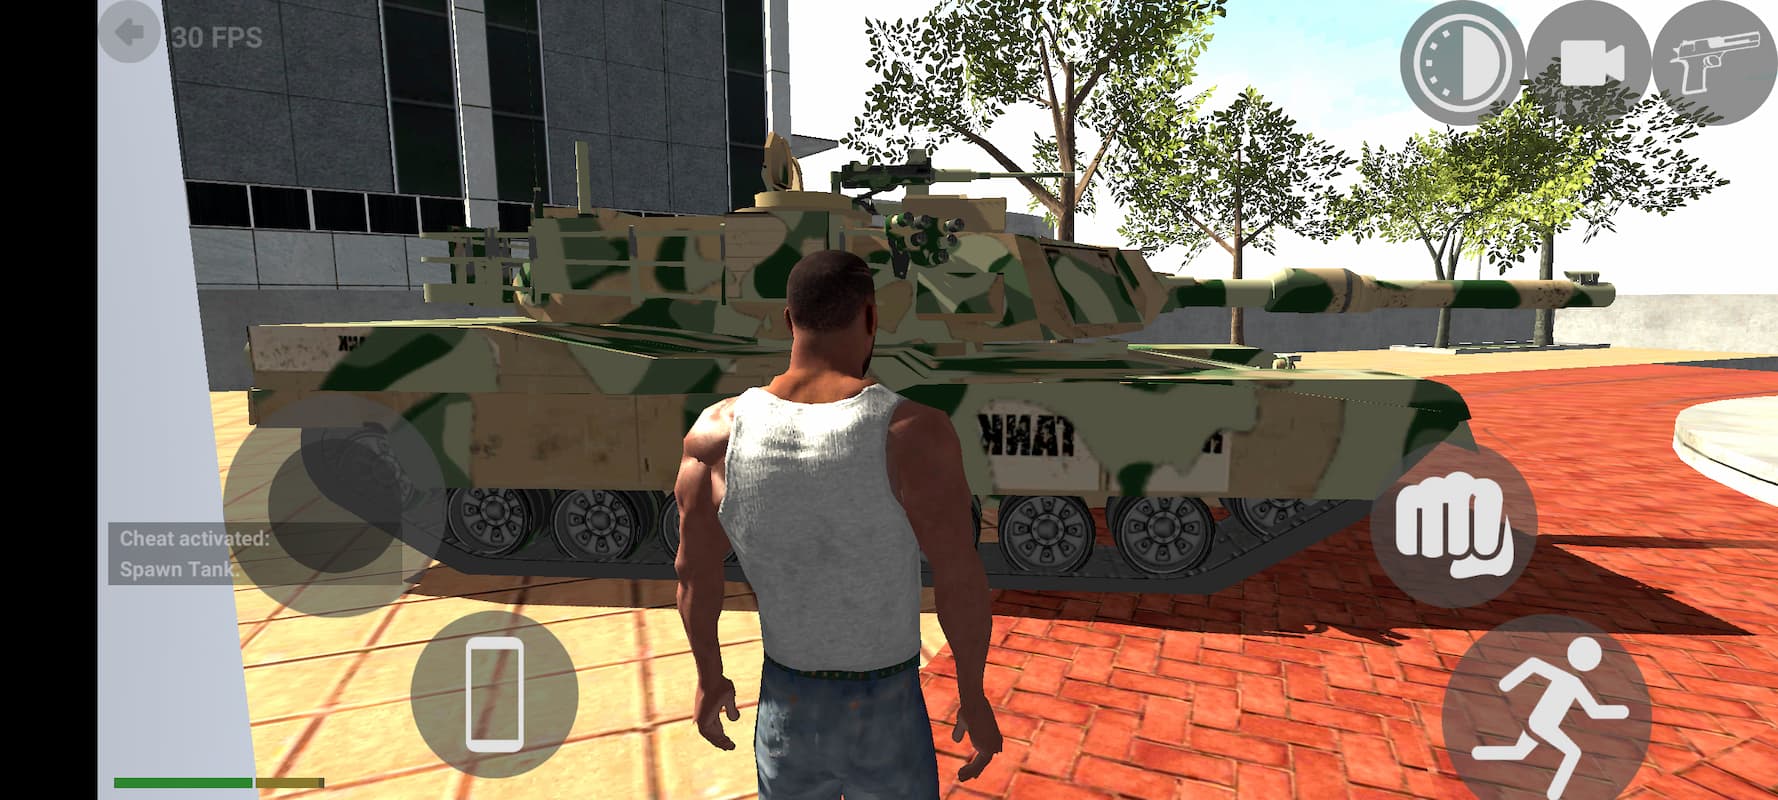 Man in front of tank after using cheat codes